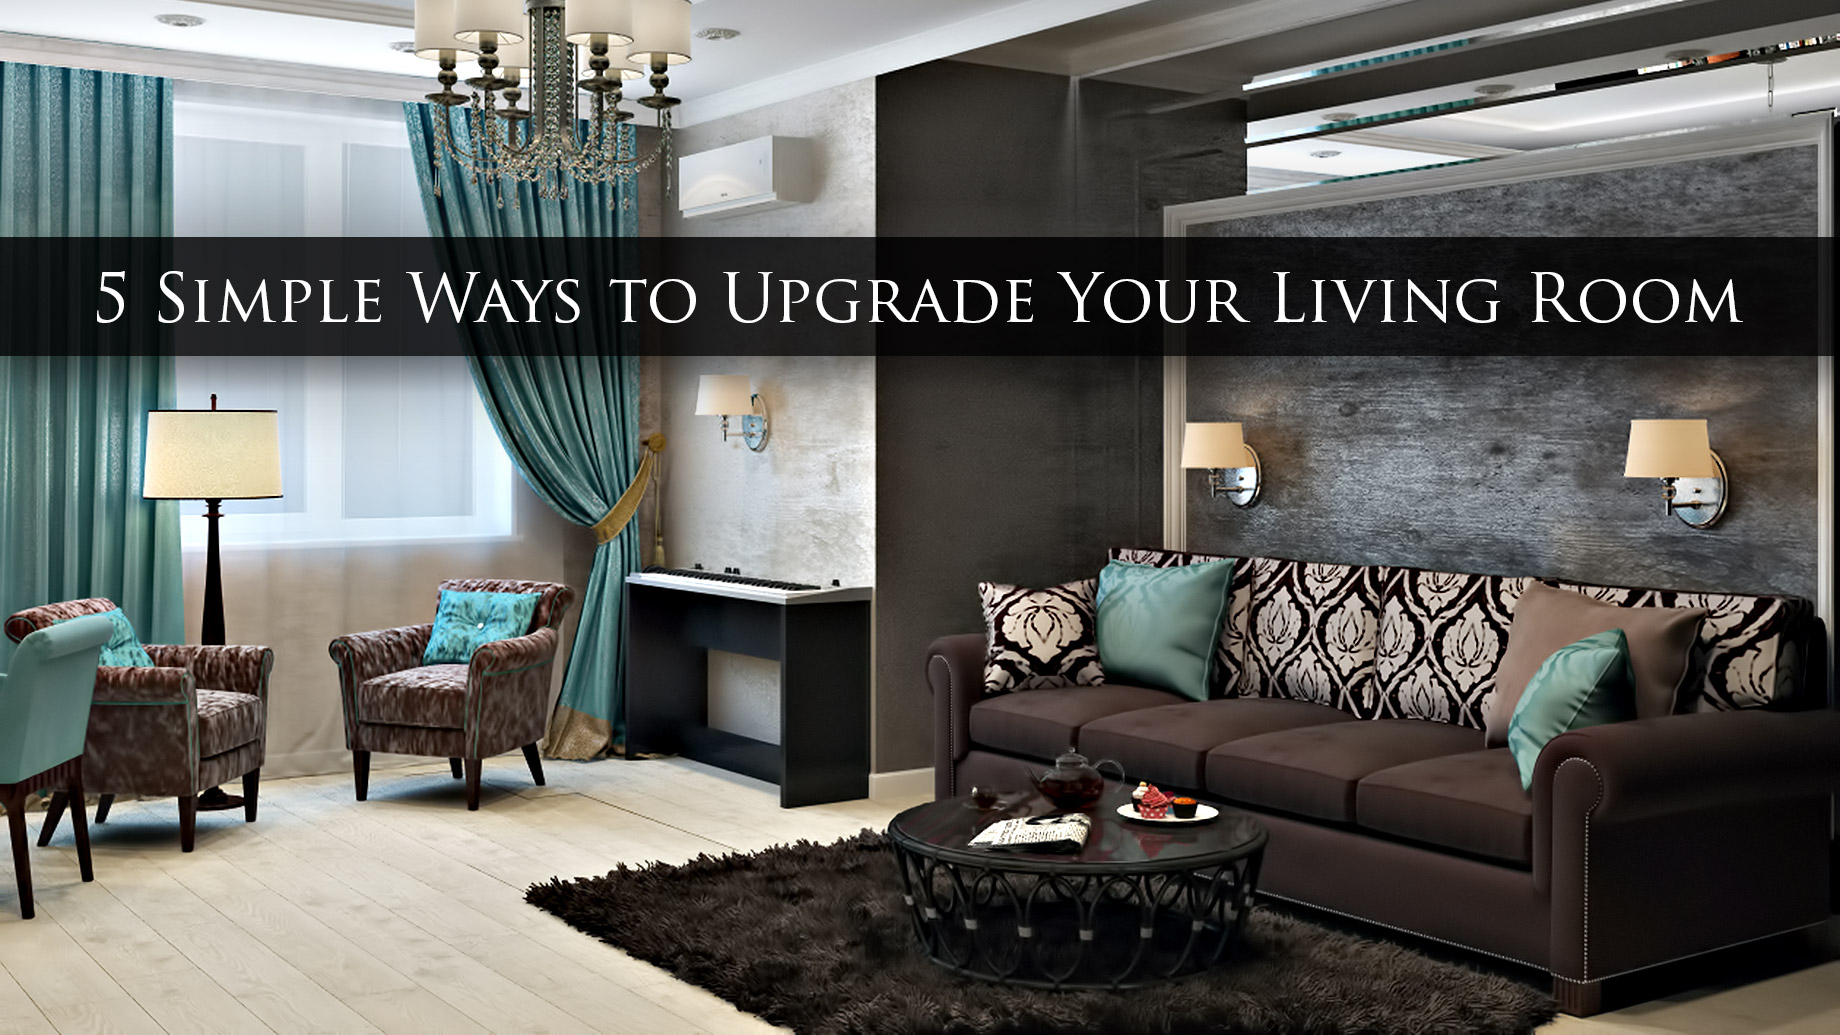 5 Simple Ways to Upgrade Your Living Room